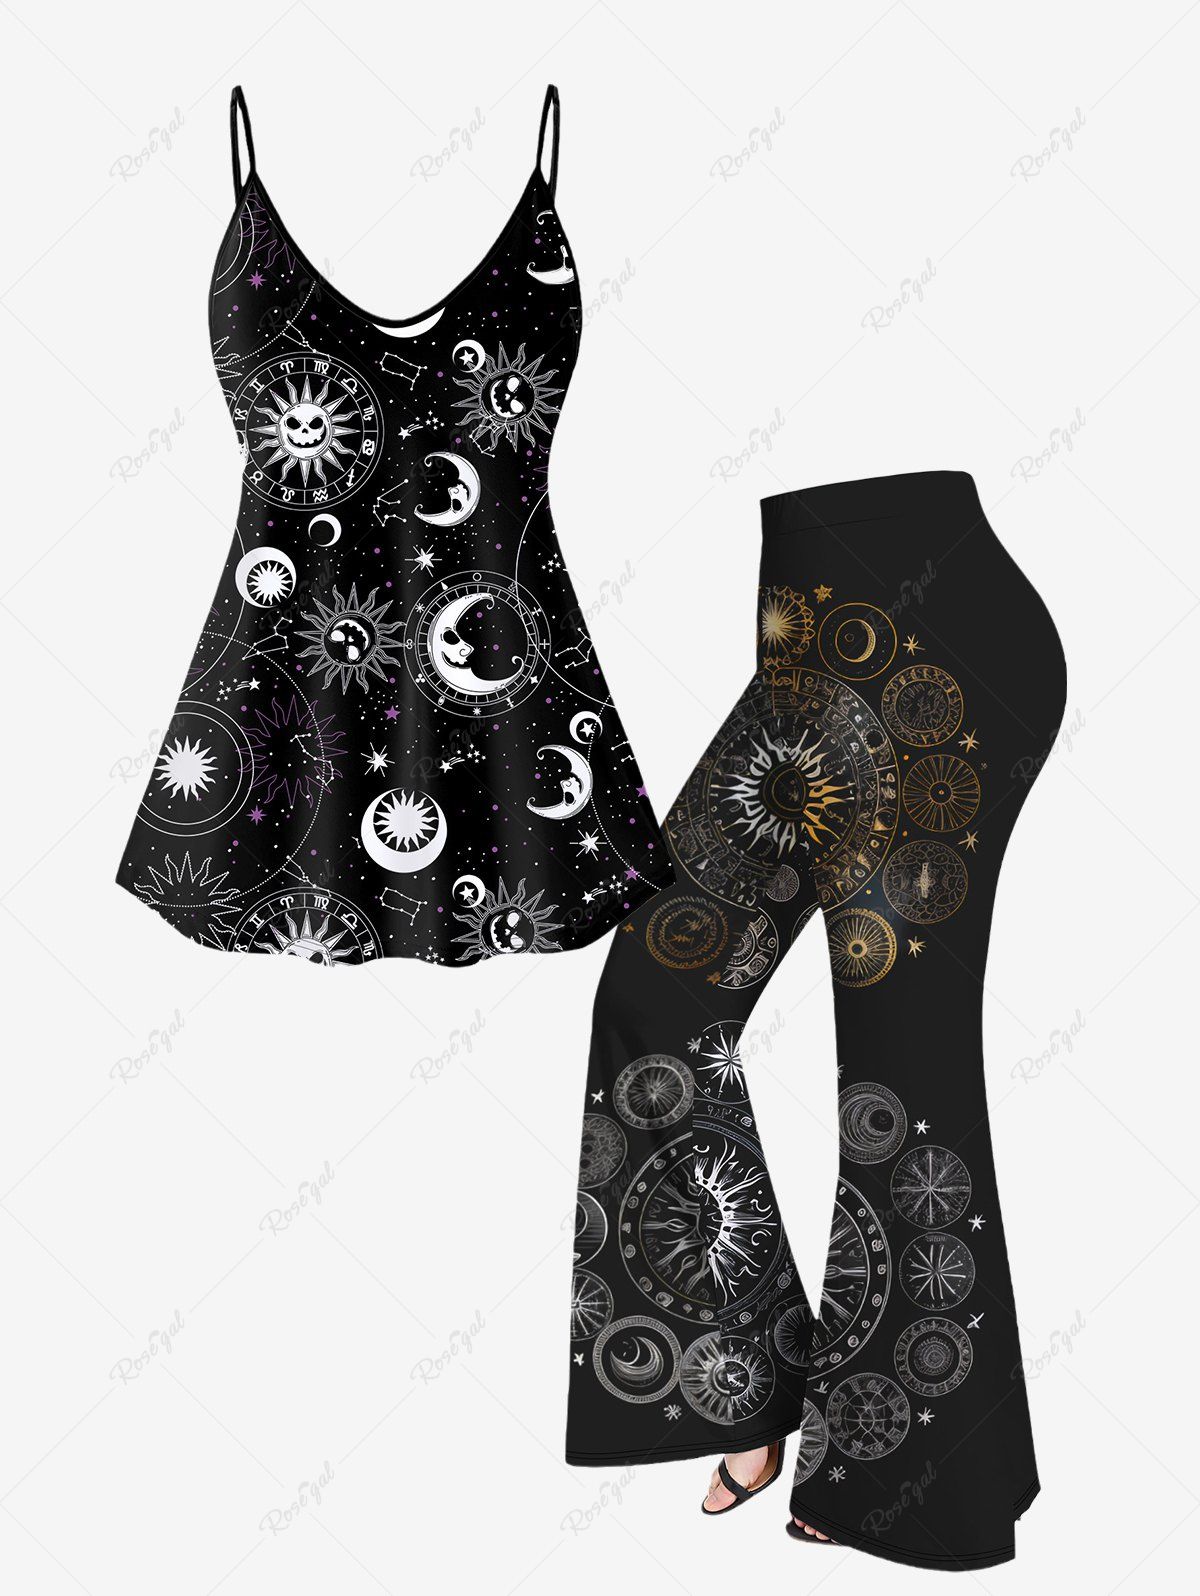 Online Gothic 3D Moon Sun Glitter Printed Spaghetti Strap Top(Adjustable Shoulder Strap) and Flare Pants Outfit  